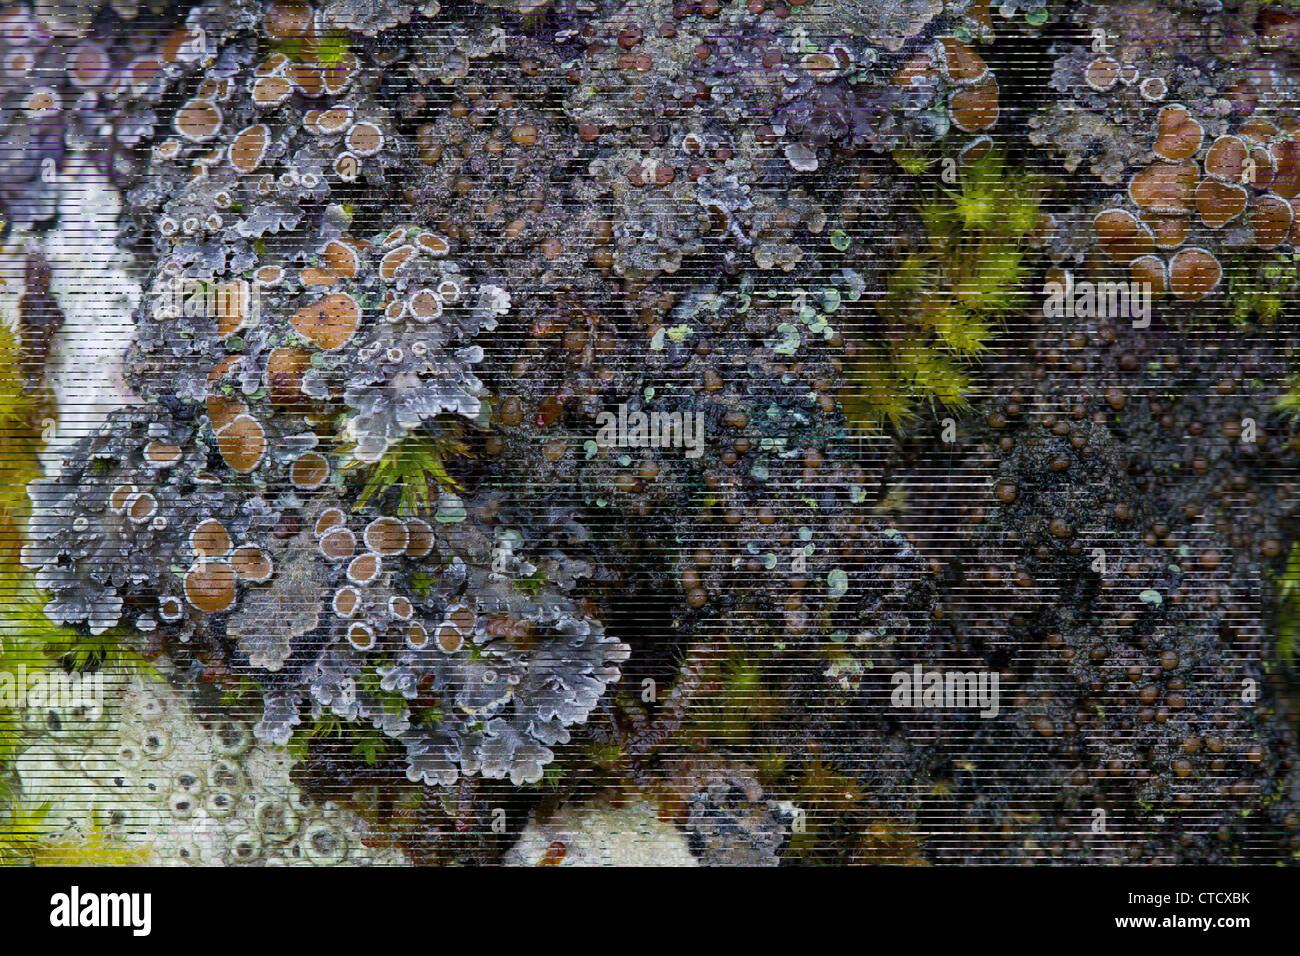 Lichen Community on trunk of old Ash tree Stock Photo